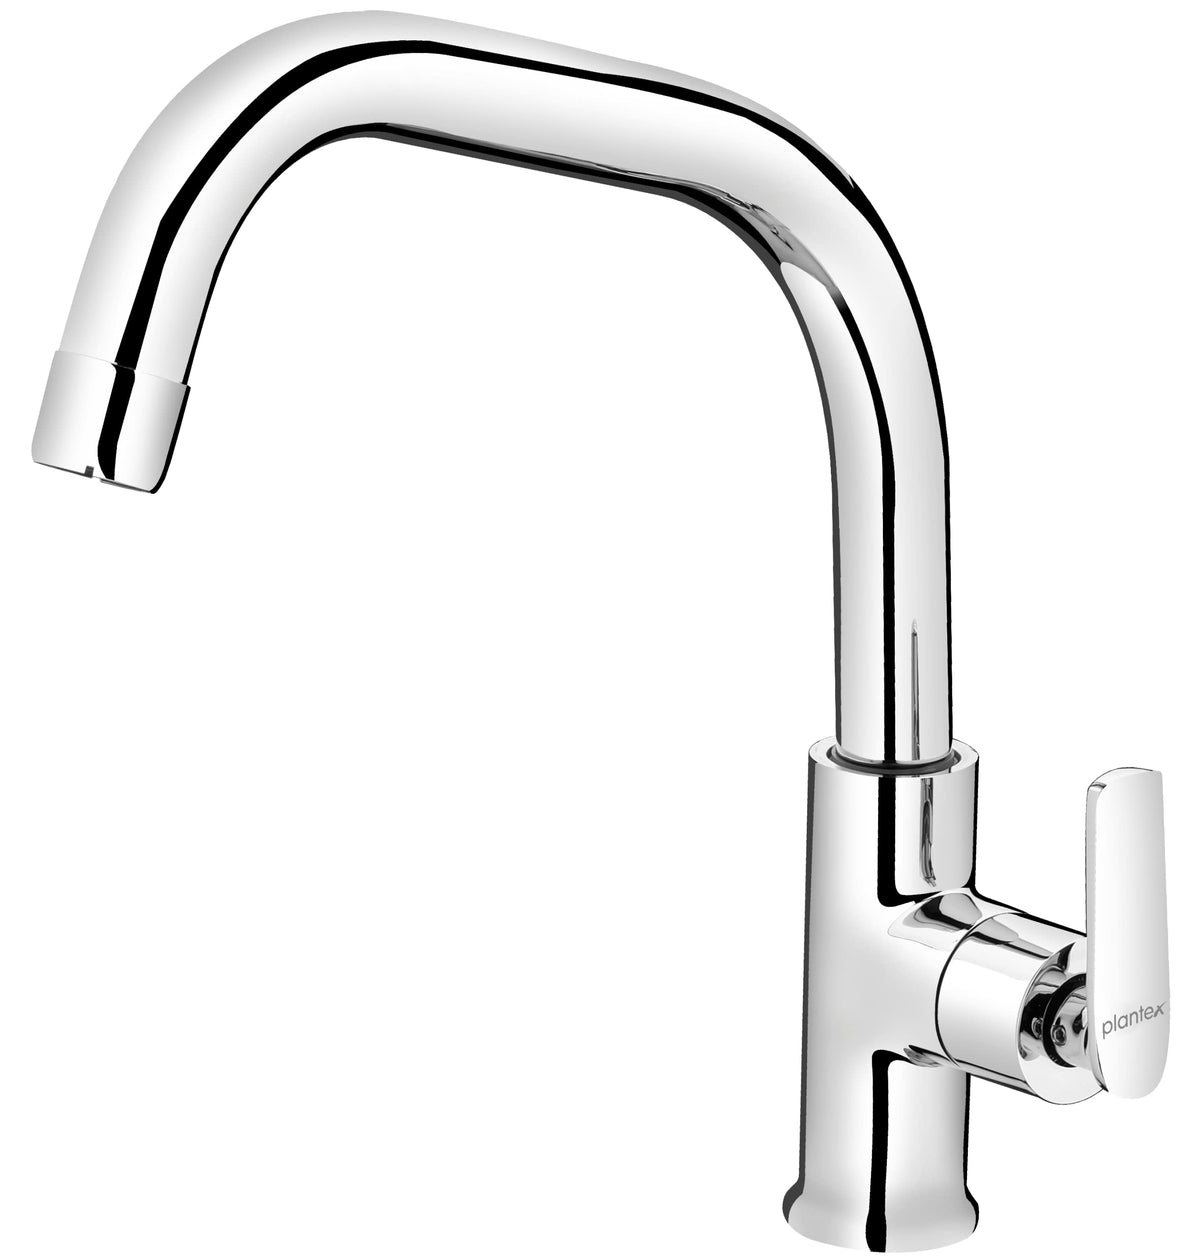 Plantex Pure Brass BAL-513 Sink Cock With (High Arch 360 Degree) Extended Swivel Spout And Single Lever Kitchen Sink Tap/Basin Faucet With Teflon Tape - Table Mounted (Mirror-Chrome Finish)